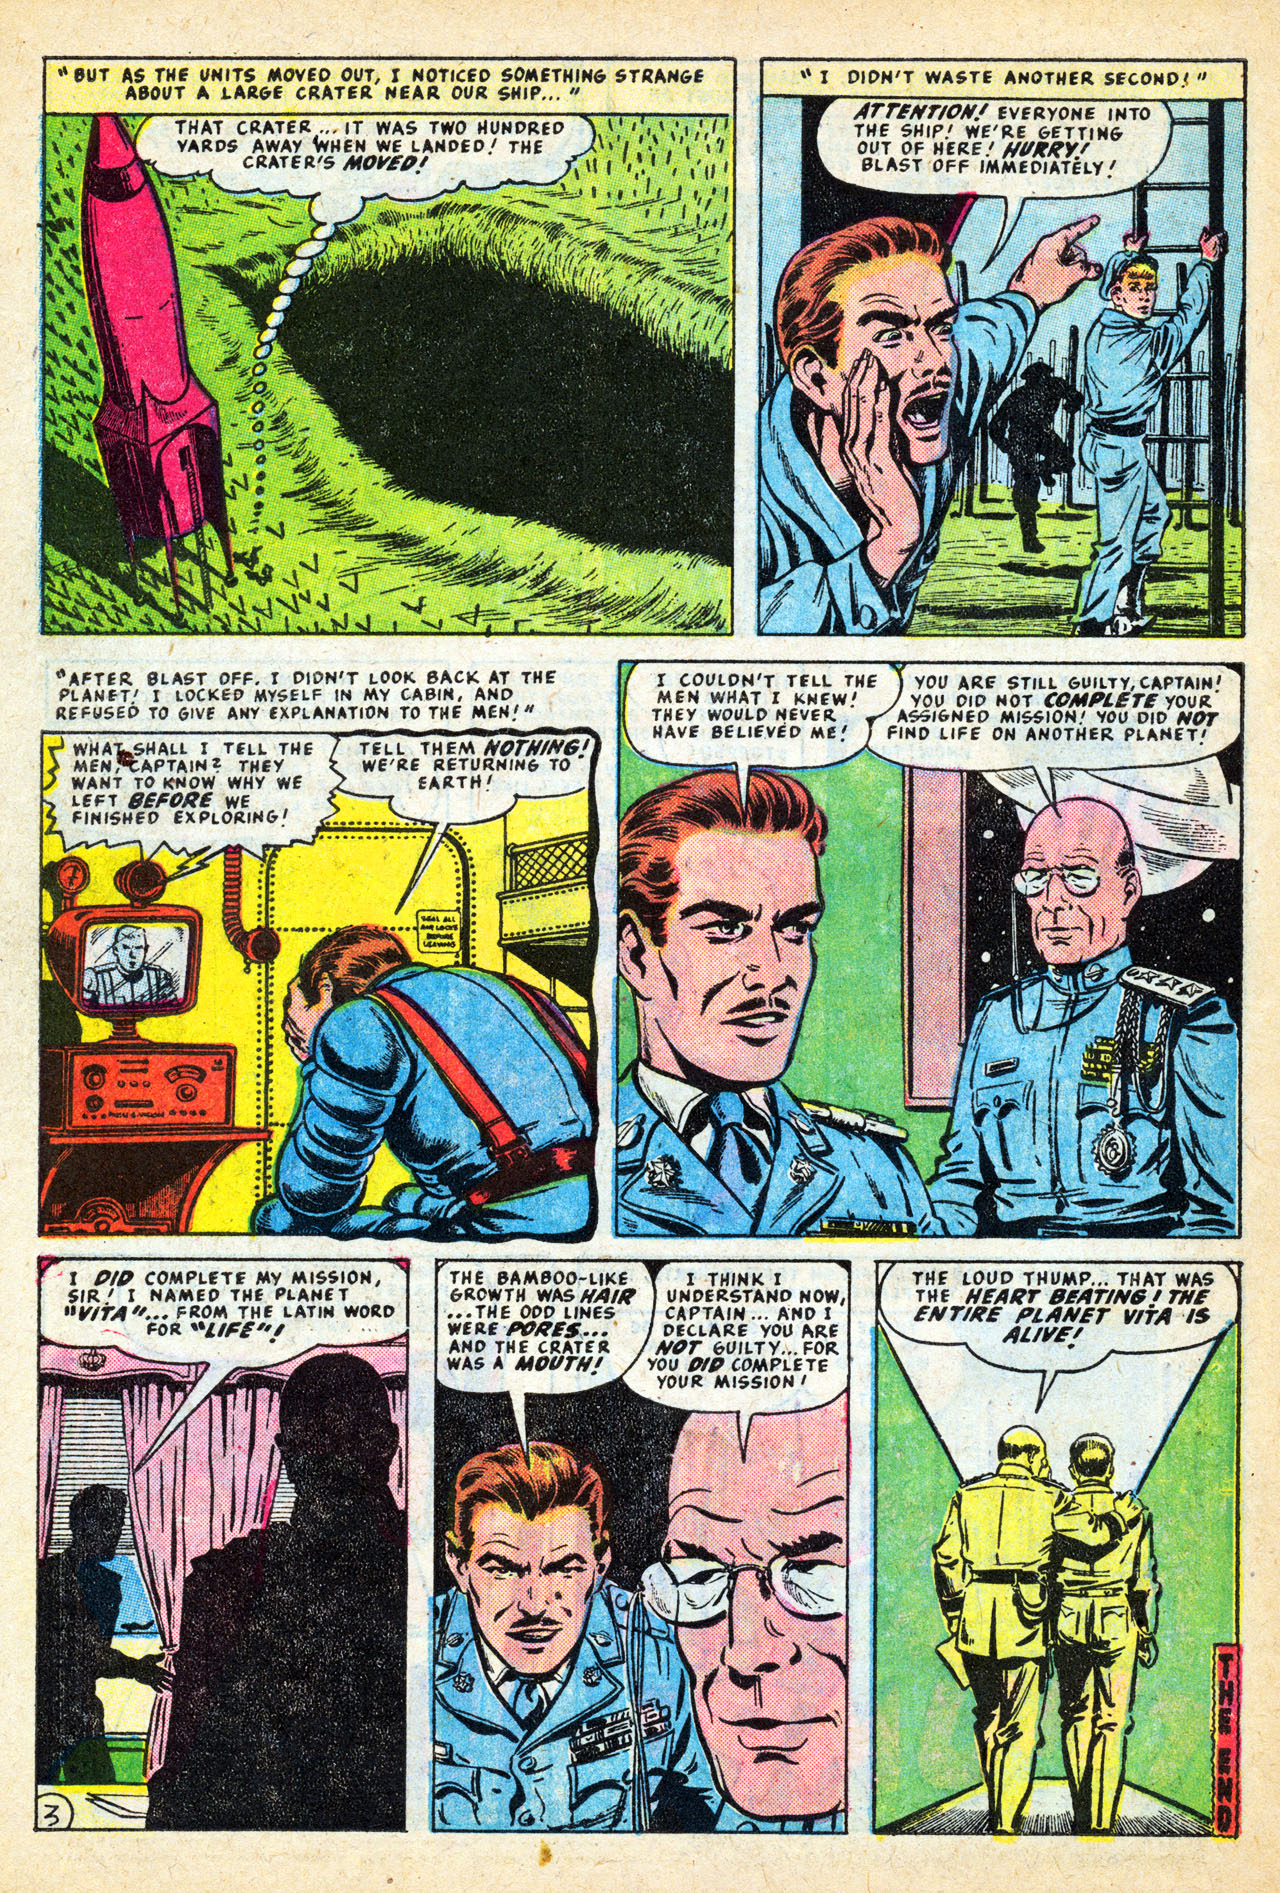 Marvel Tales (1949) 151 Page 25